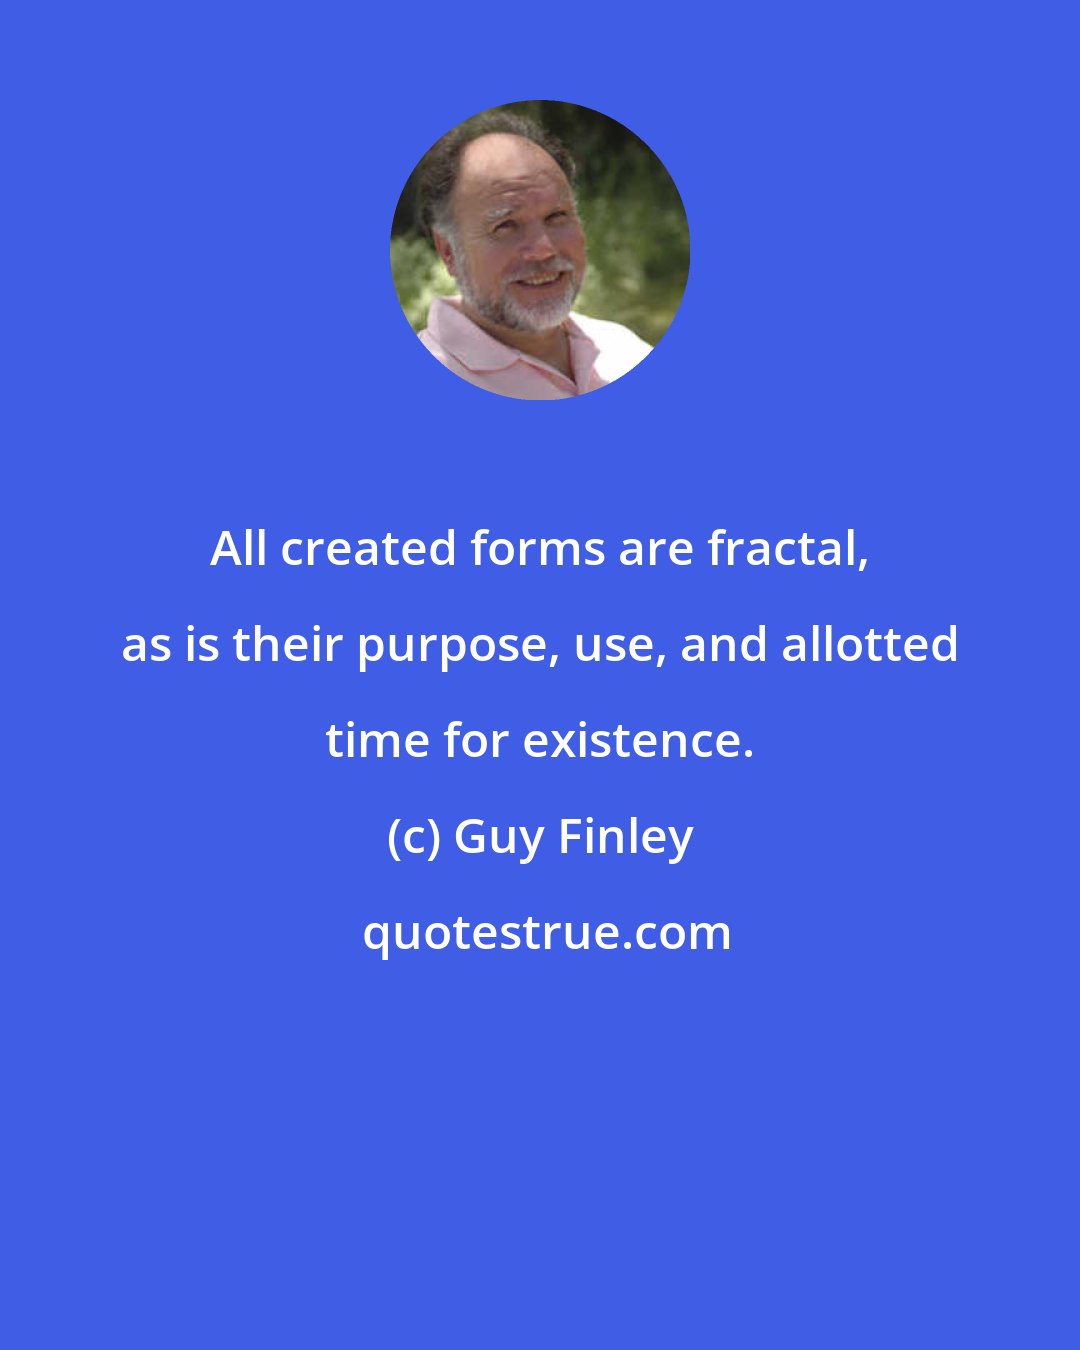 Guy Finley: All created forms are fractal, as is their purpose, use, and allotted time for existence.